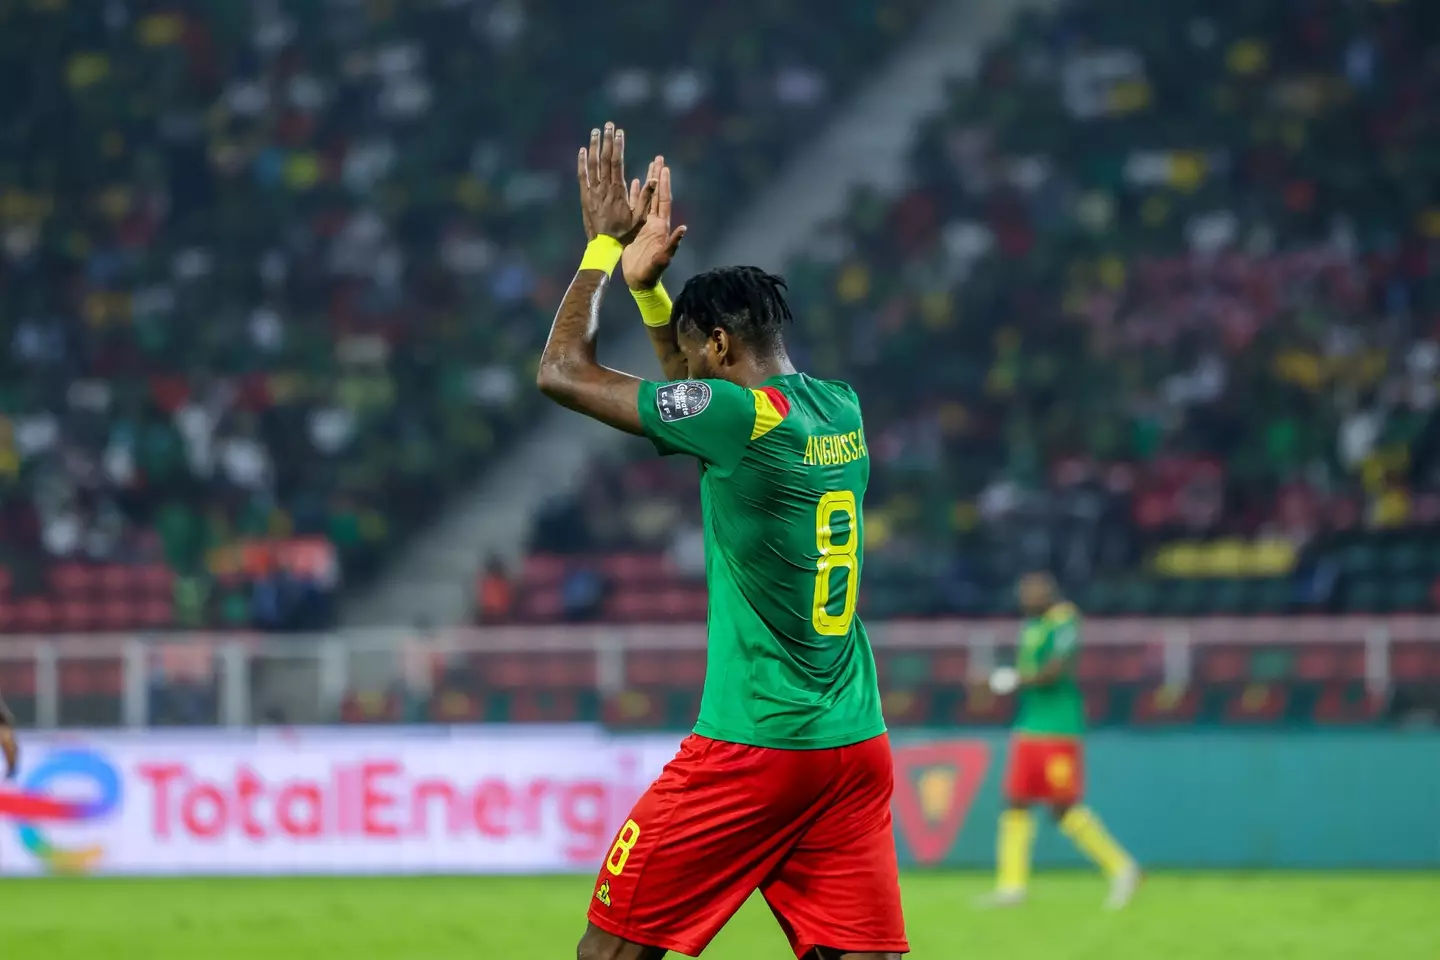 Andre Zambo Anguissa of Cameroon during the Africa Cup of Nations play offs semi final match between Cameroon and Egypt. Image credit: Alamy